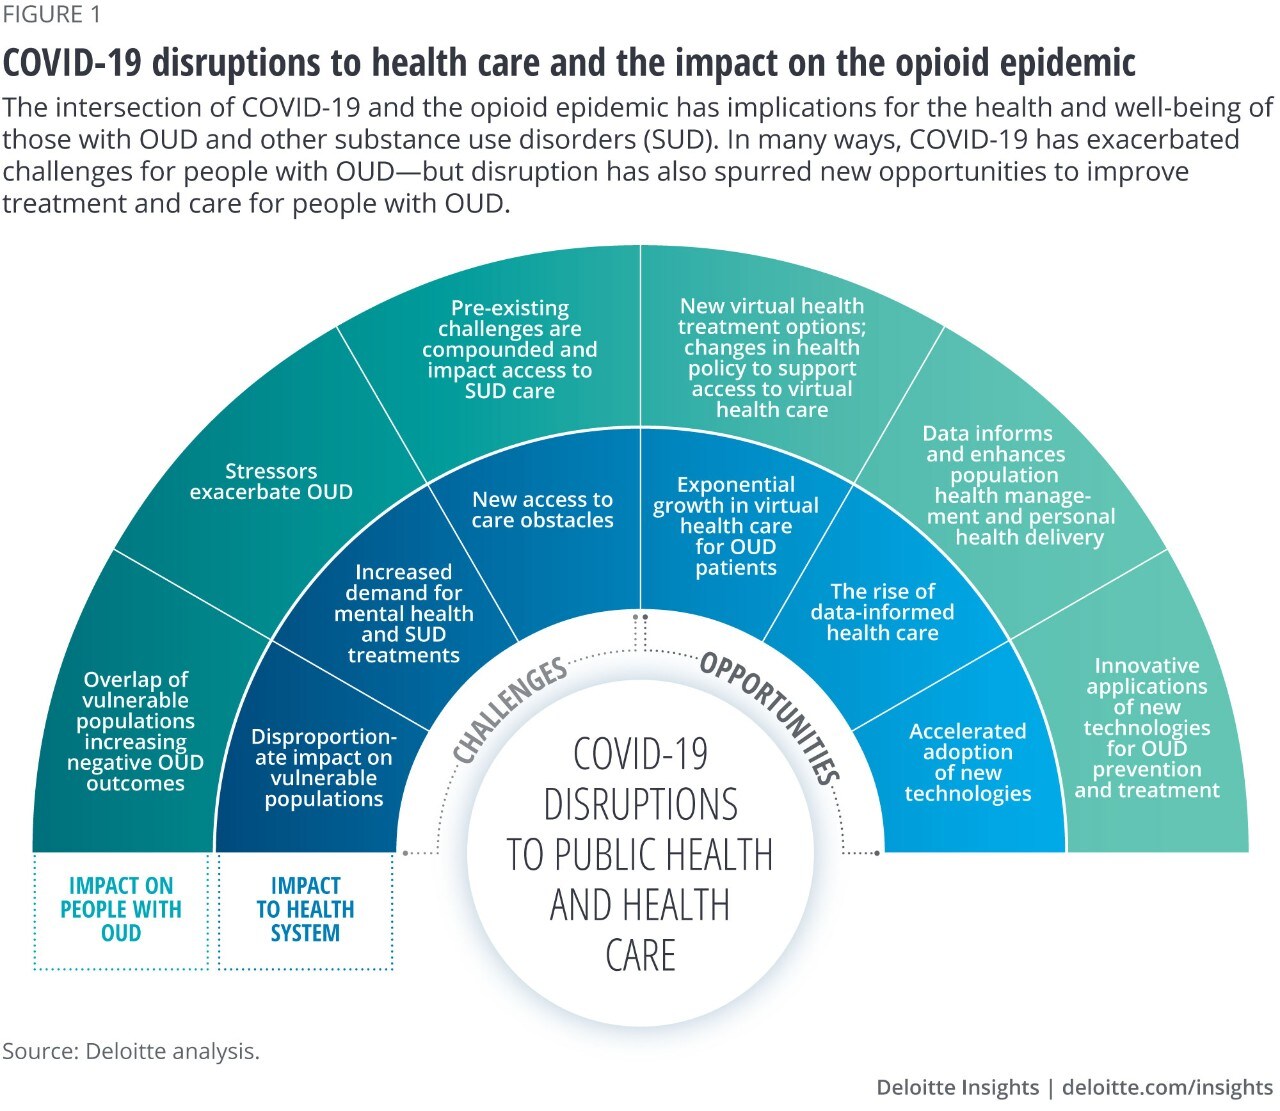 COVID-19 disruptions to the health care system and impact on the opioid epidemic